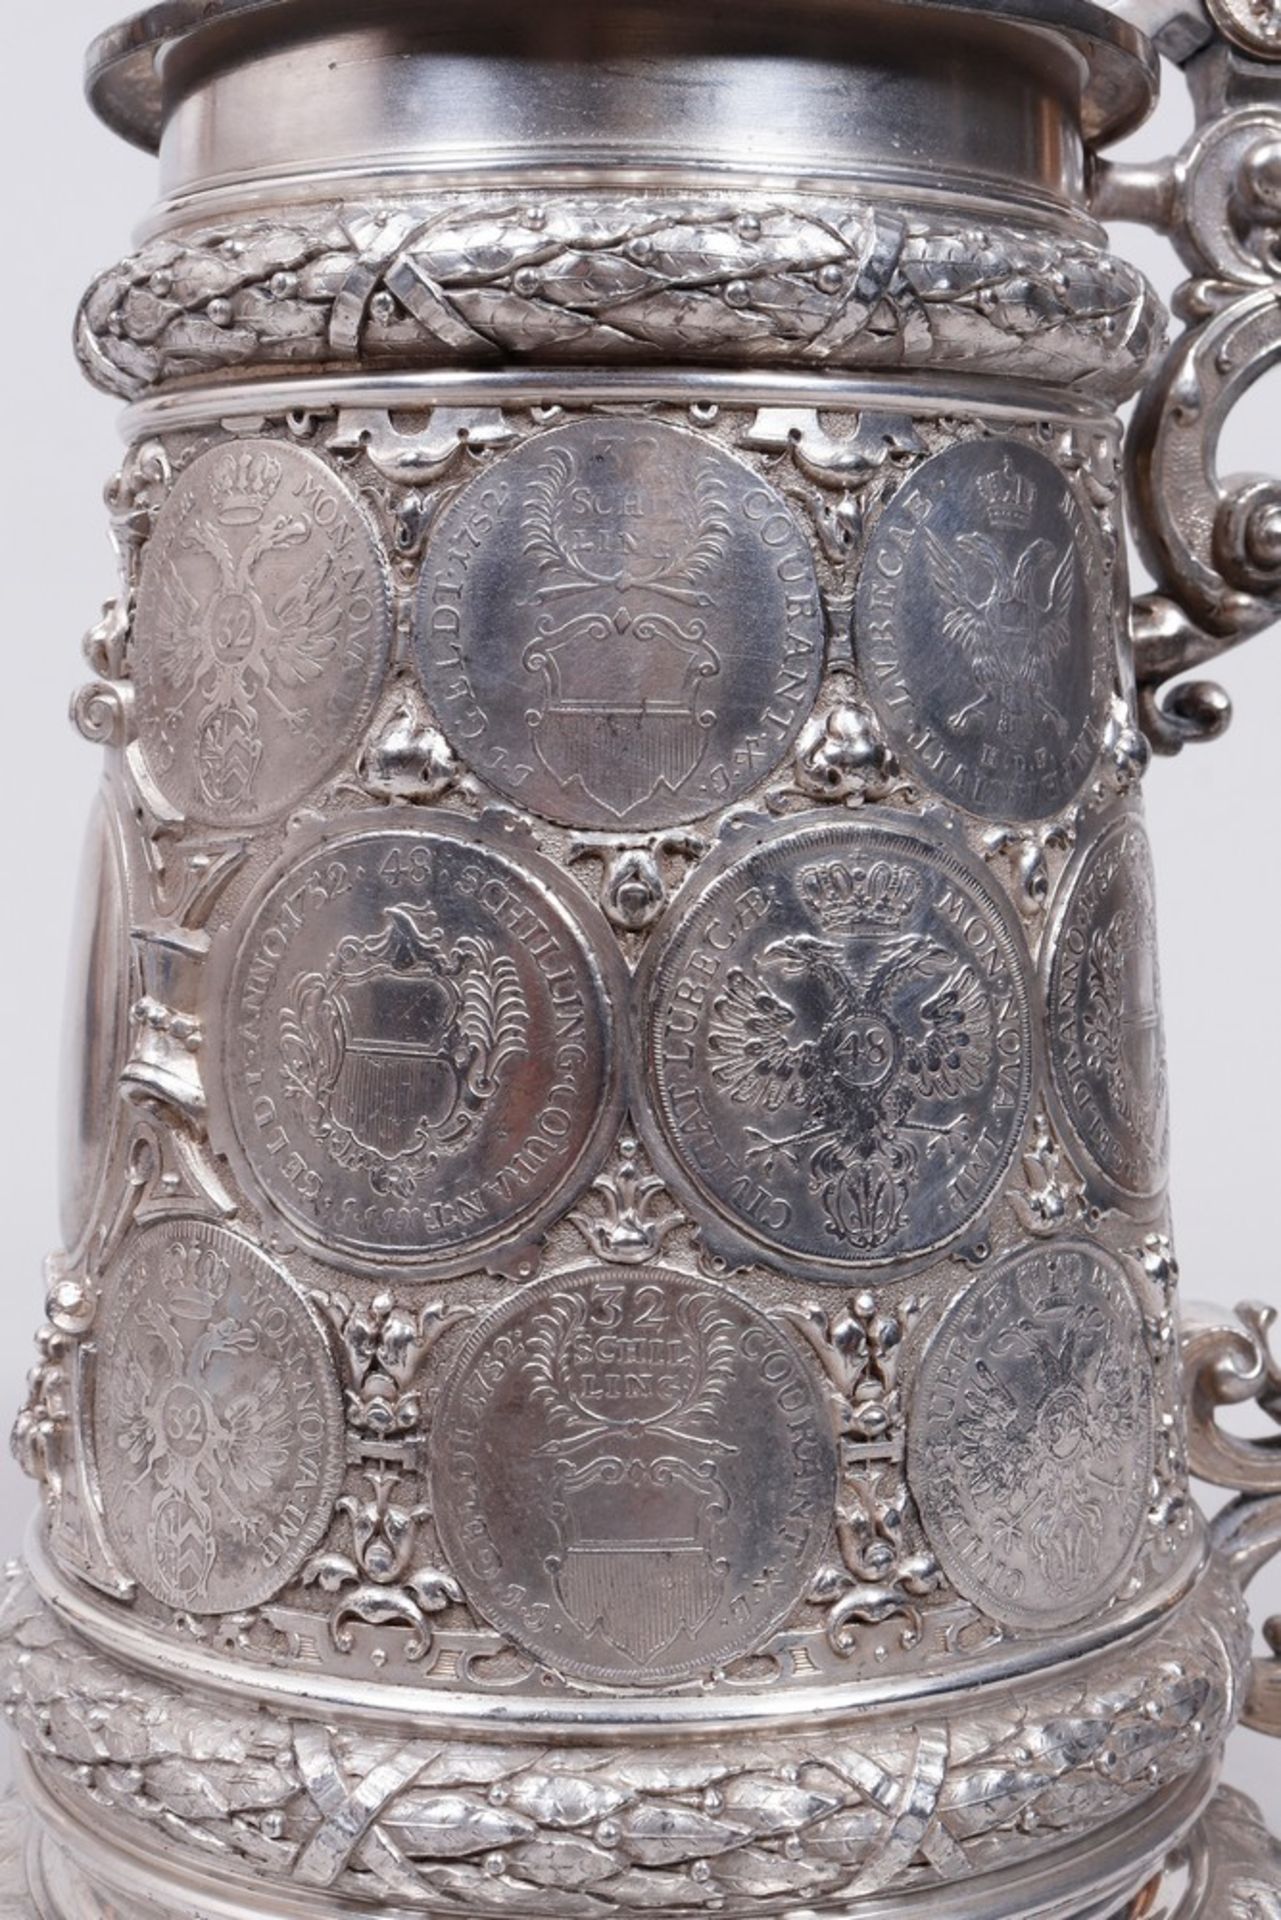 Historicism coin tankard, silver-plated, WMF, Geislingen, c. 1900 - Image 6 of 7